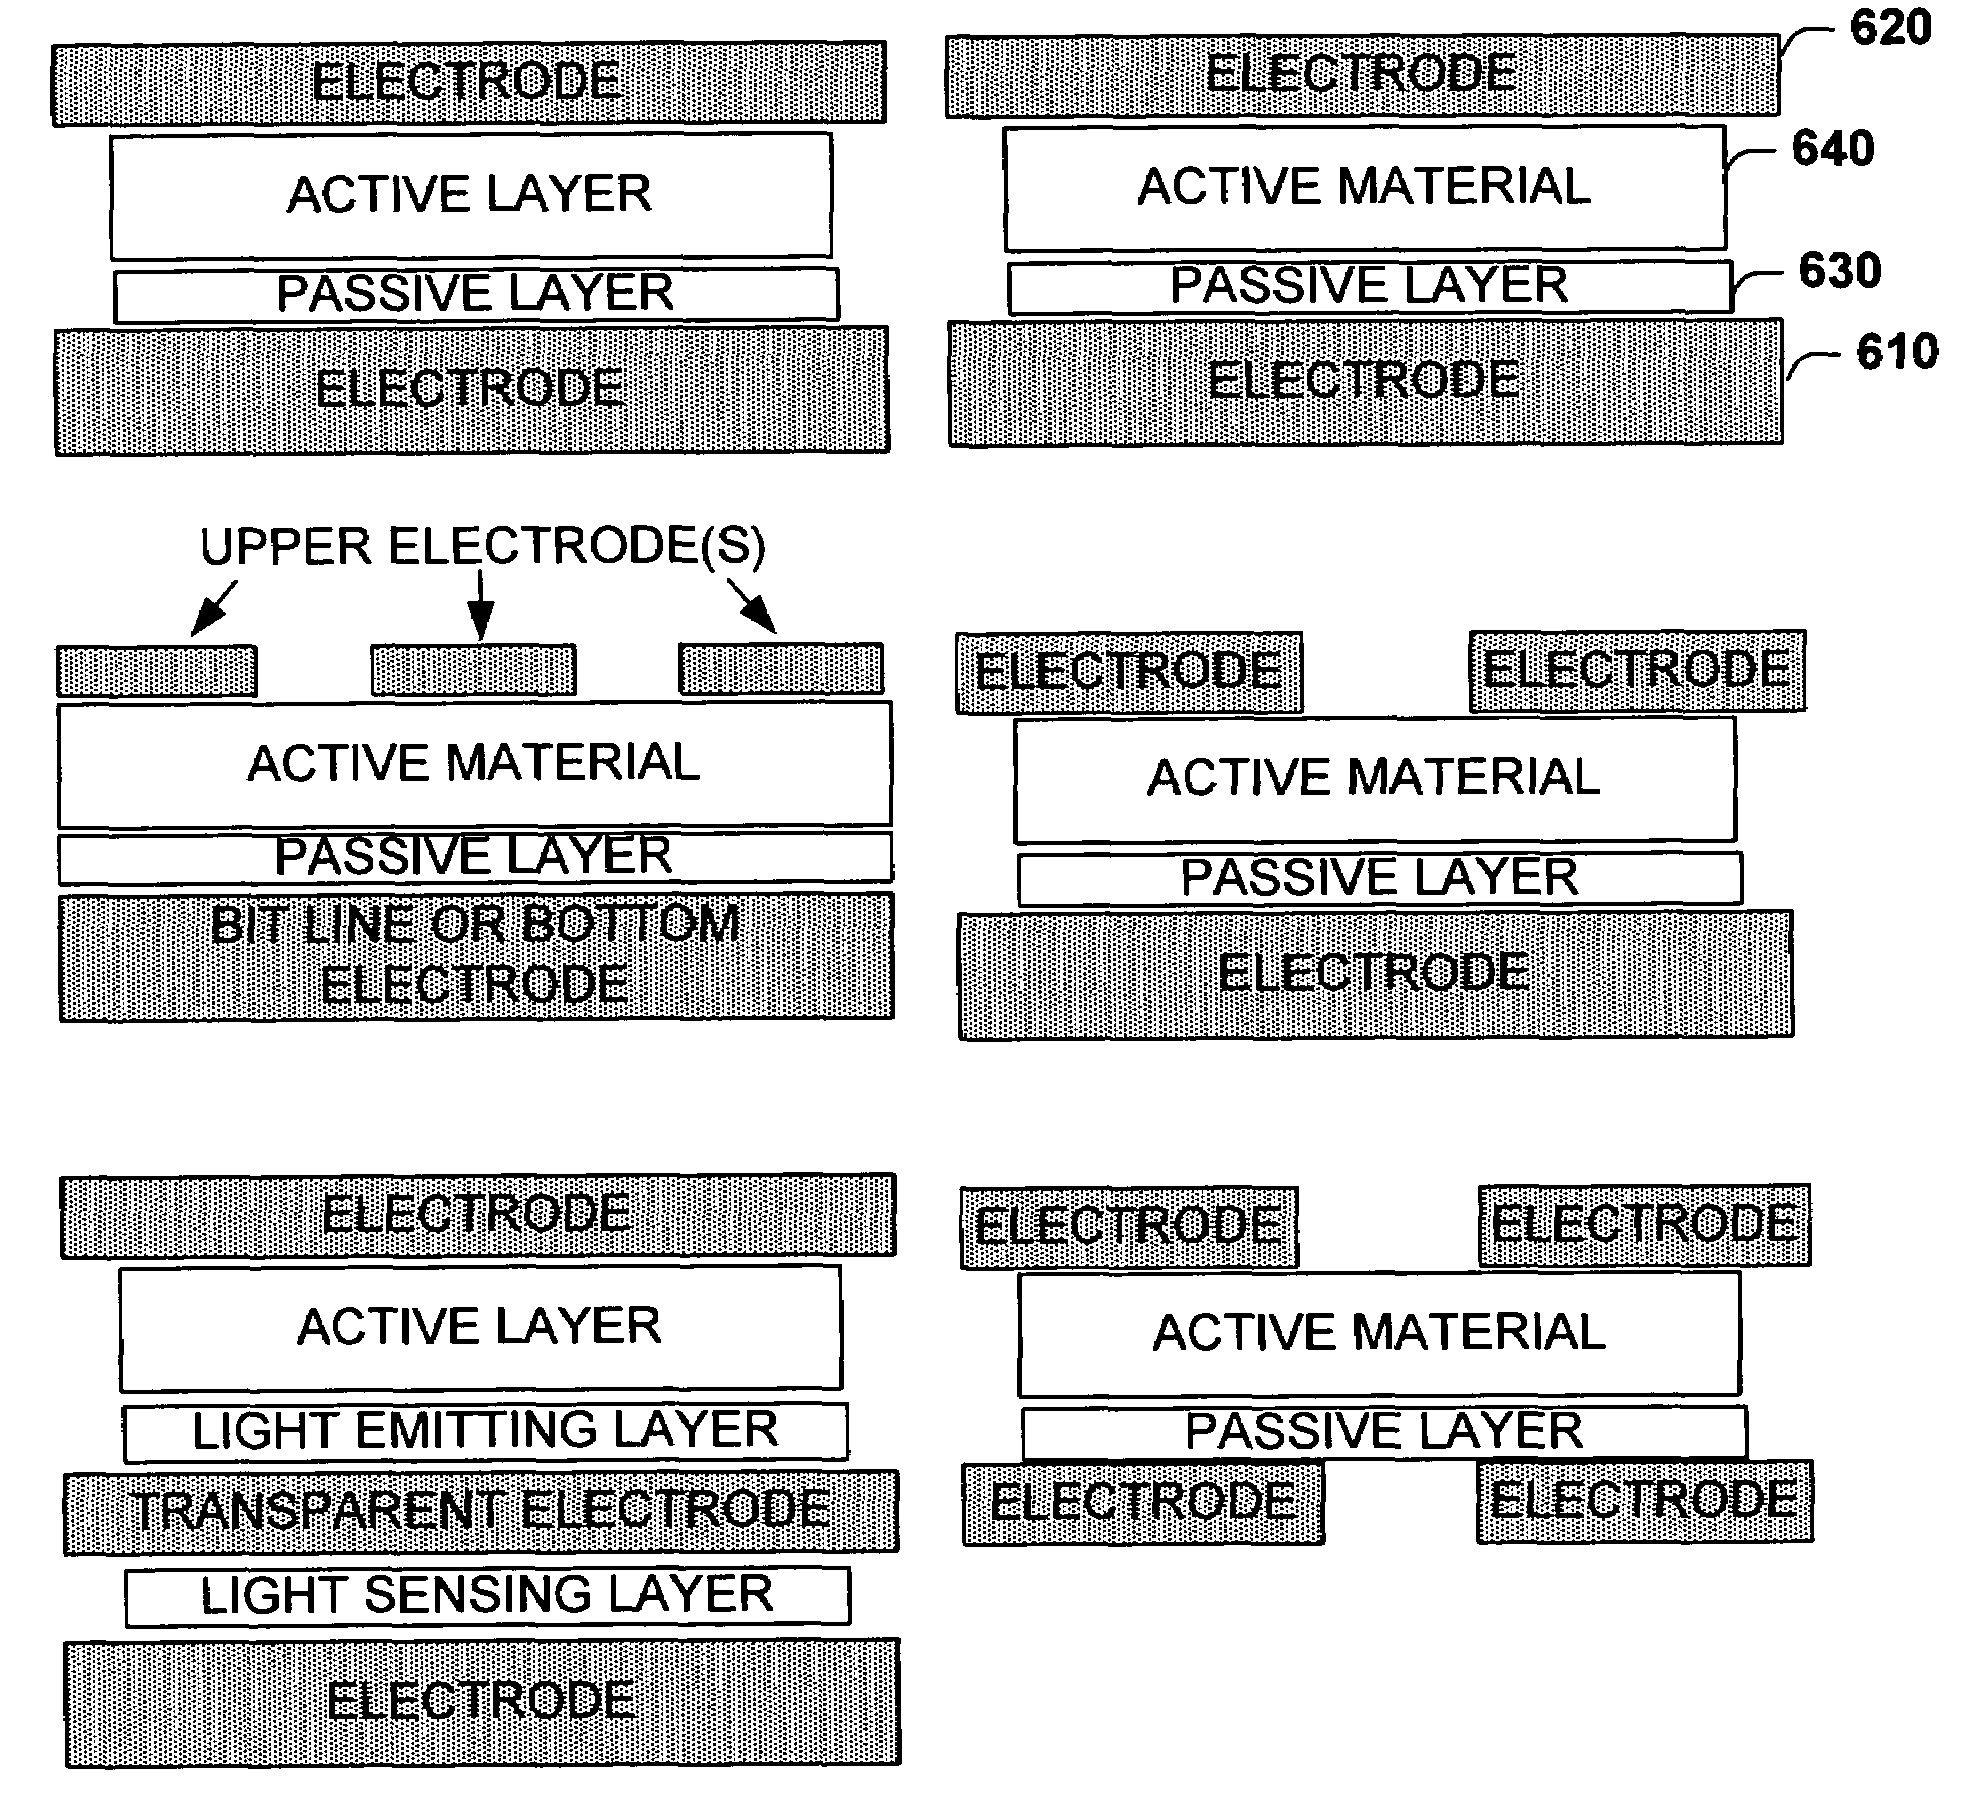 Method to improve yield and simplify operation of polymer memory cells